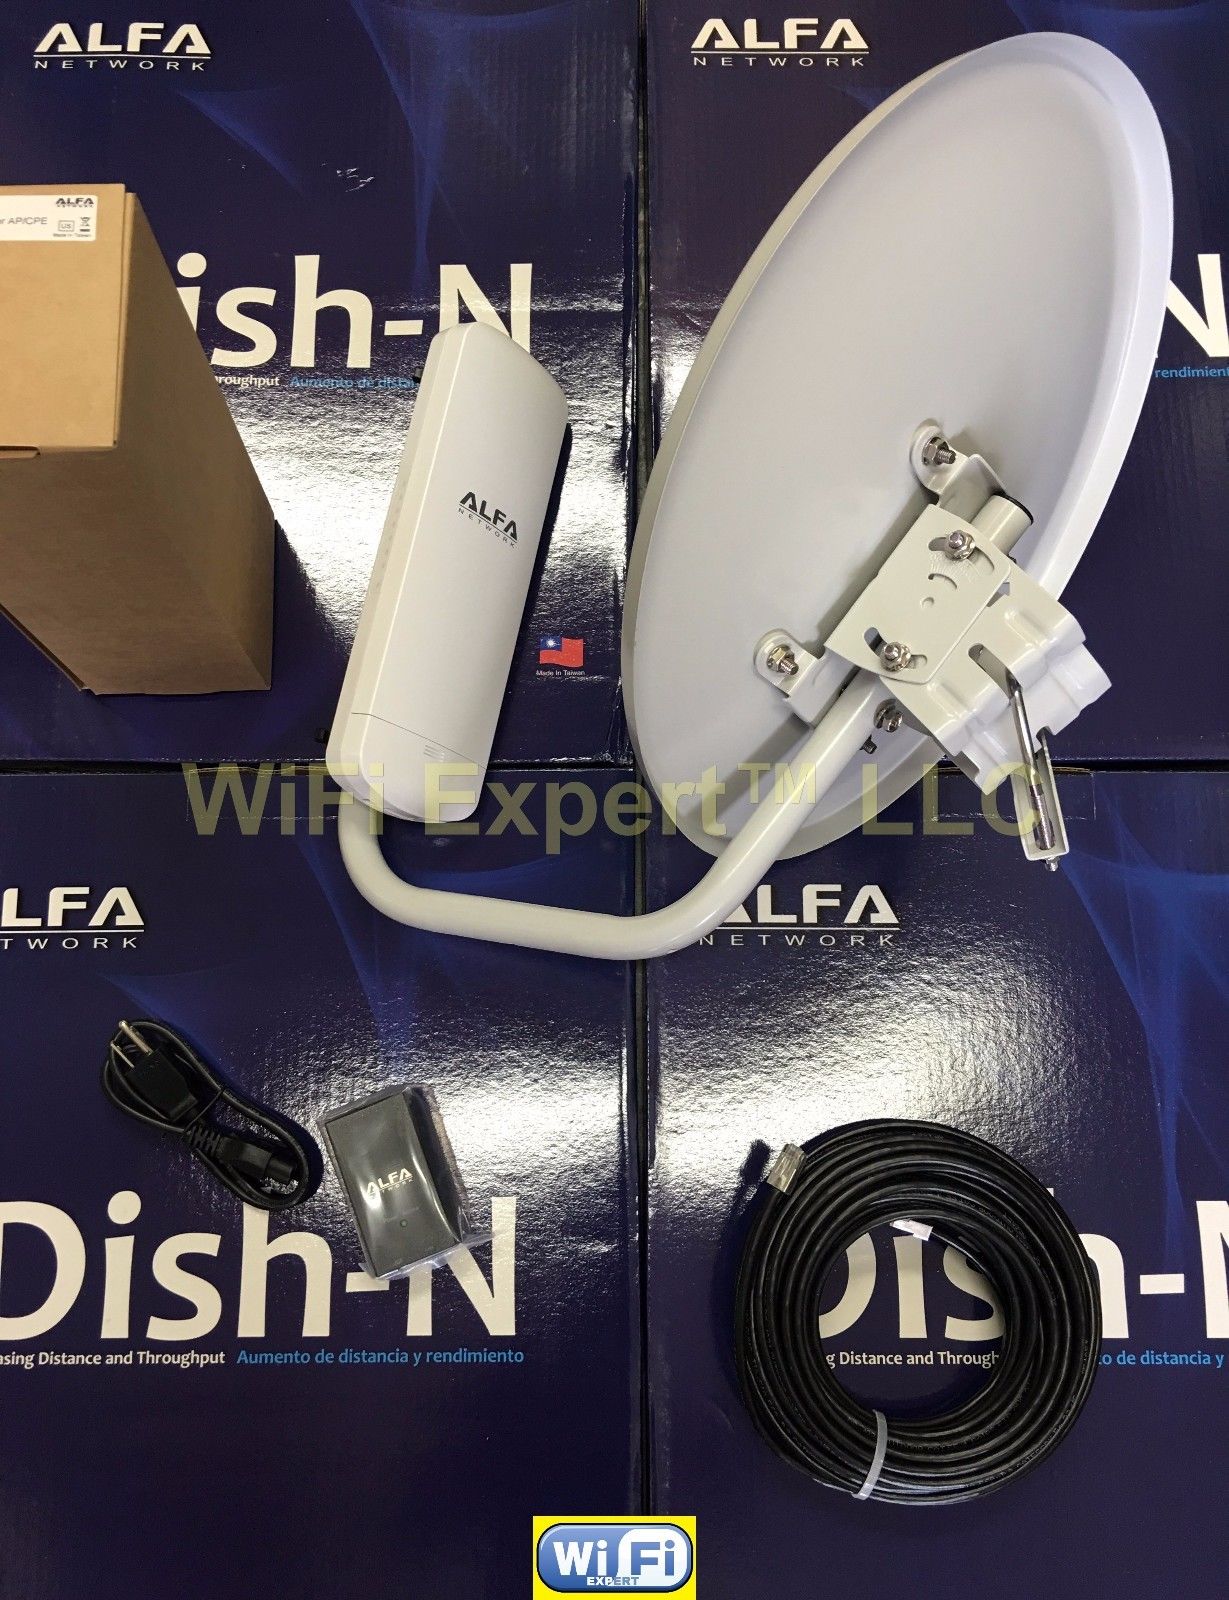 FOR USE WITH Alfa N2S Alfa Network Dish-N Antenna ONLY N5 and Ubiquiti N2 